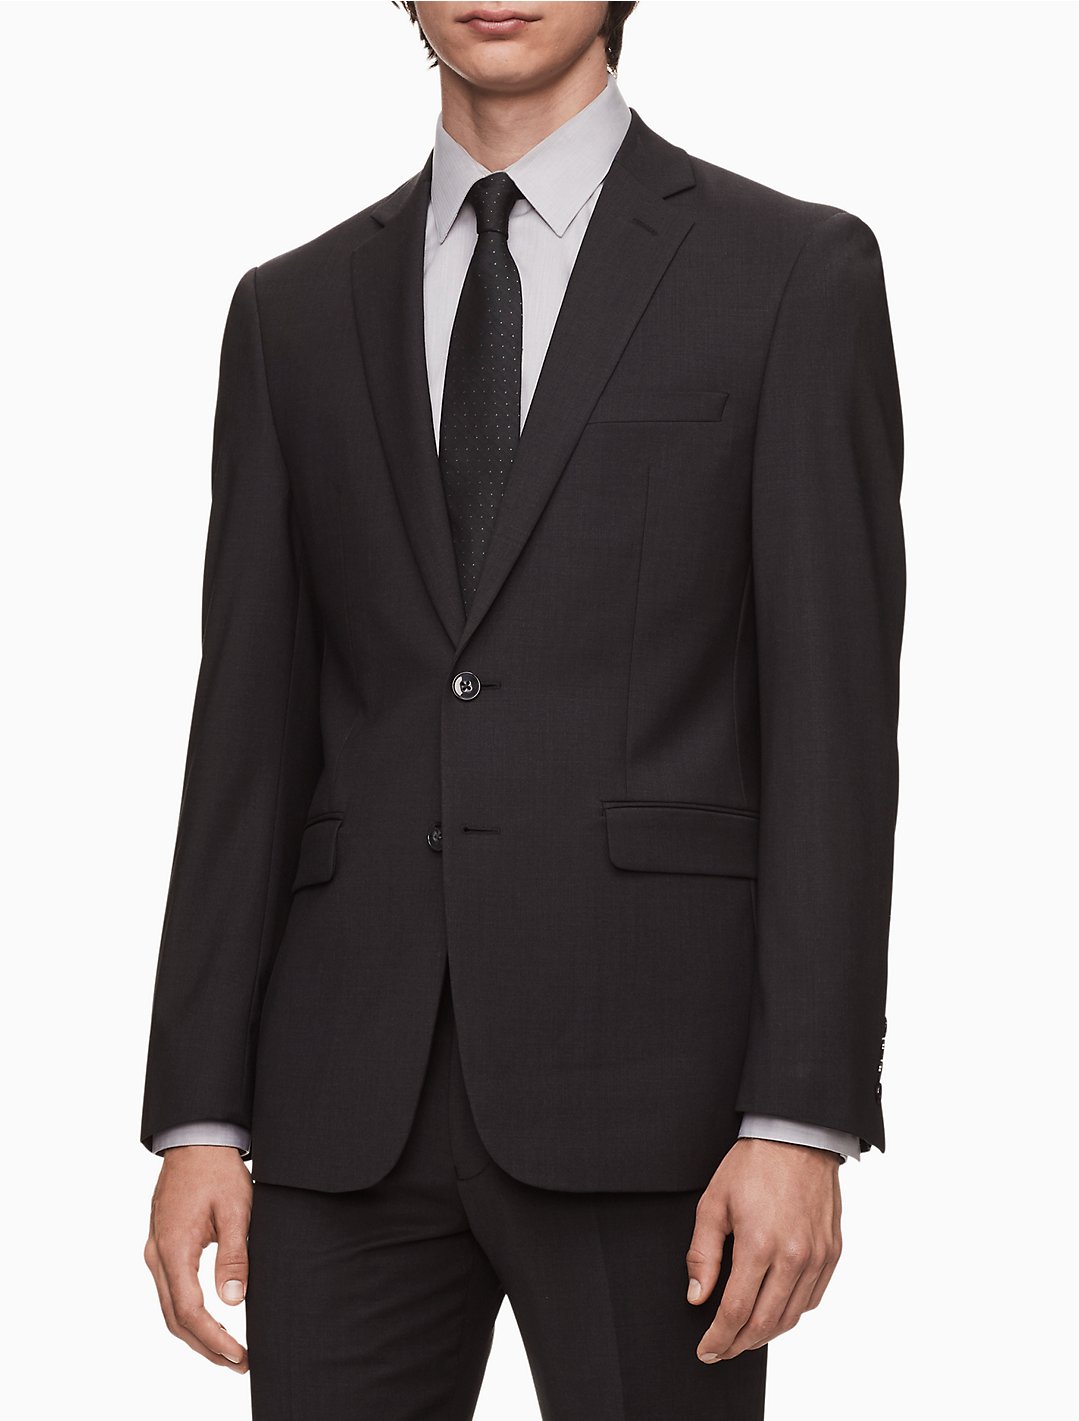 Skinny Fit Charcoal Grey Suit Jacket | Calvin Klein® USA